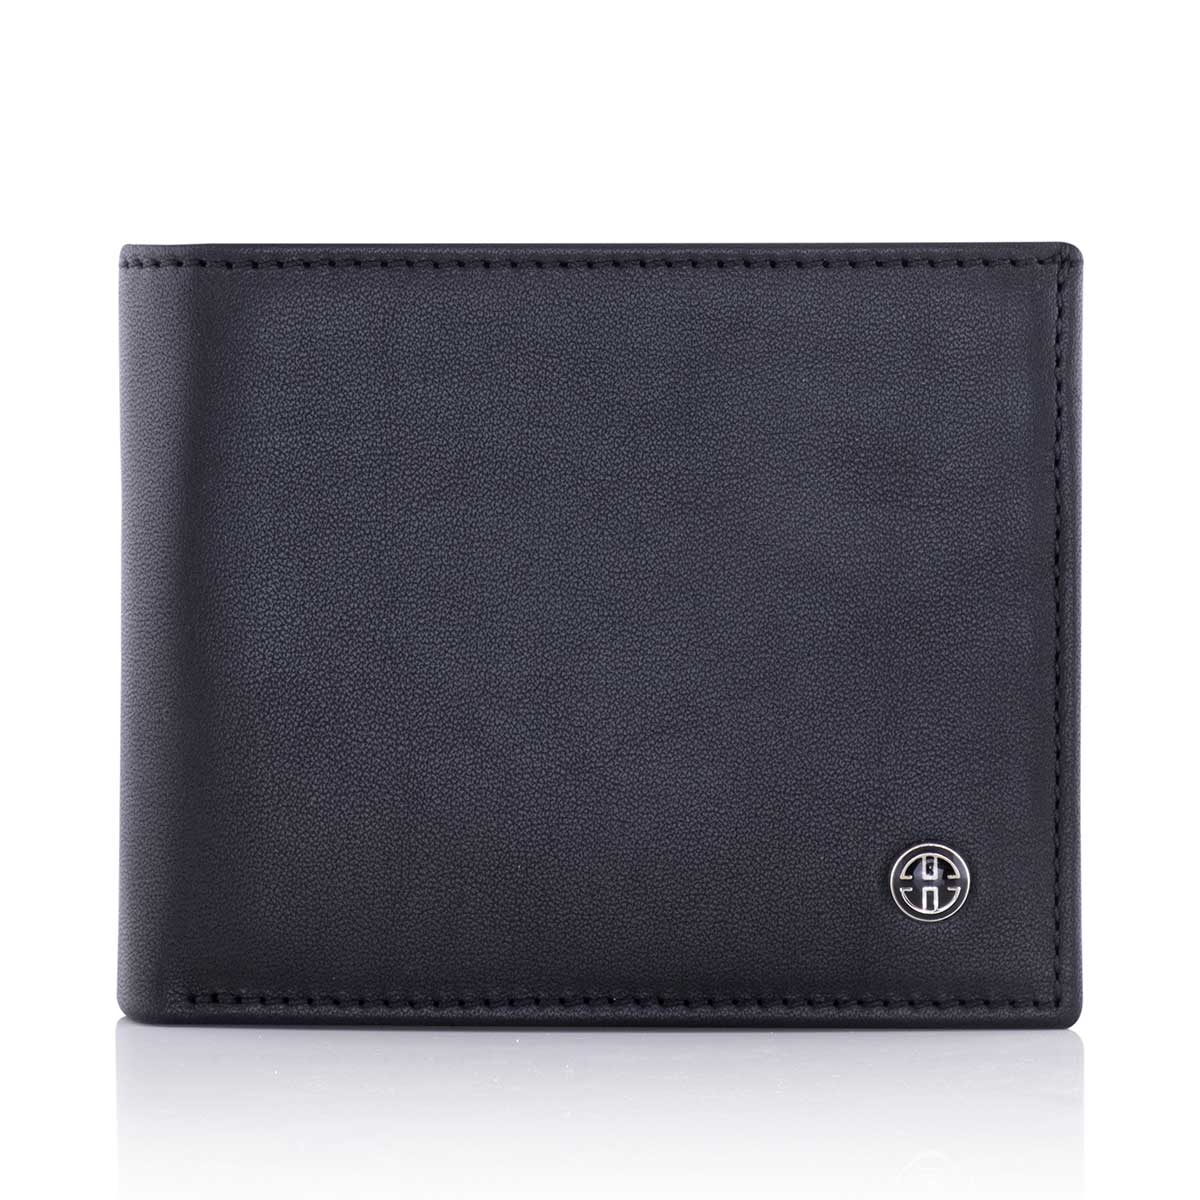 Buy Trusador Savona Classic Men's Wallets Leather Bifold with RFID Wallet  for Men Gift Box, Black, Classic at